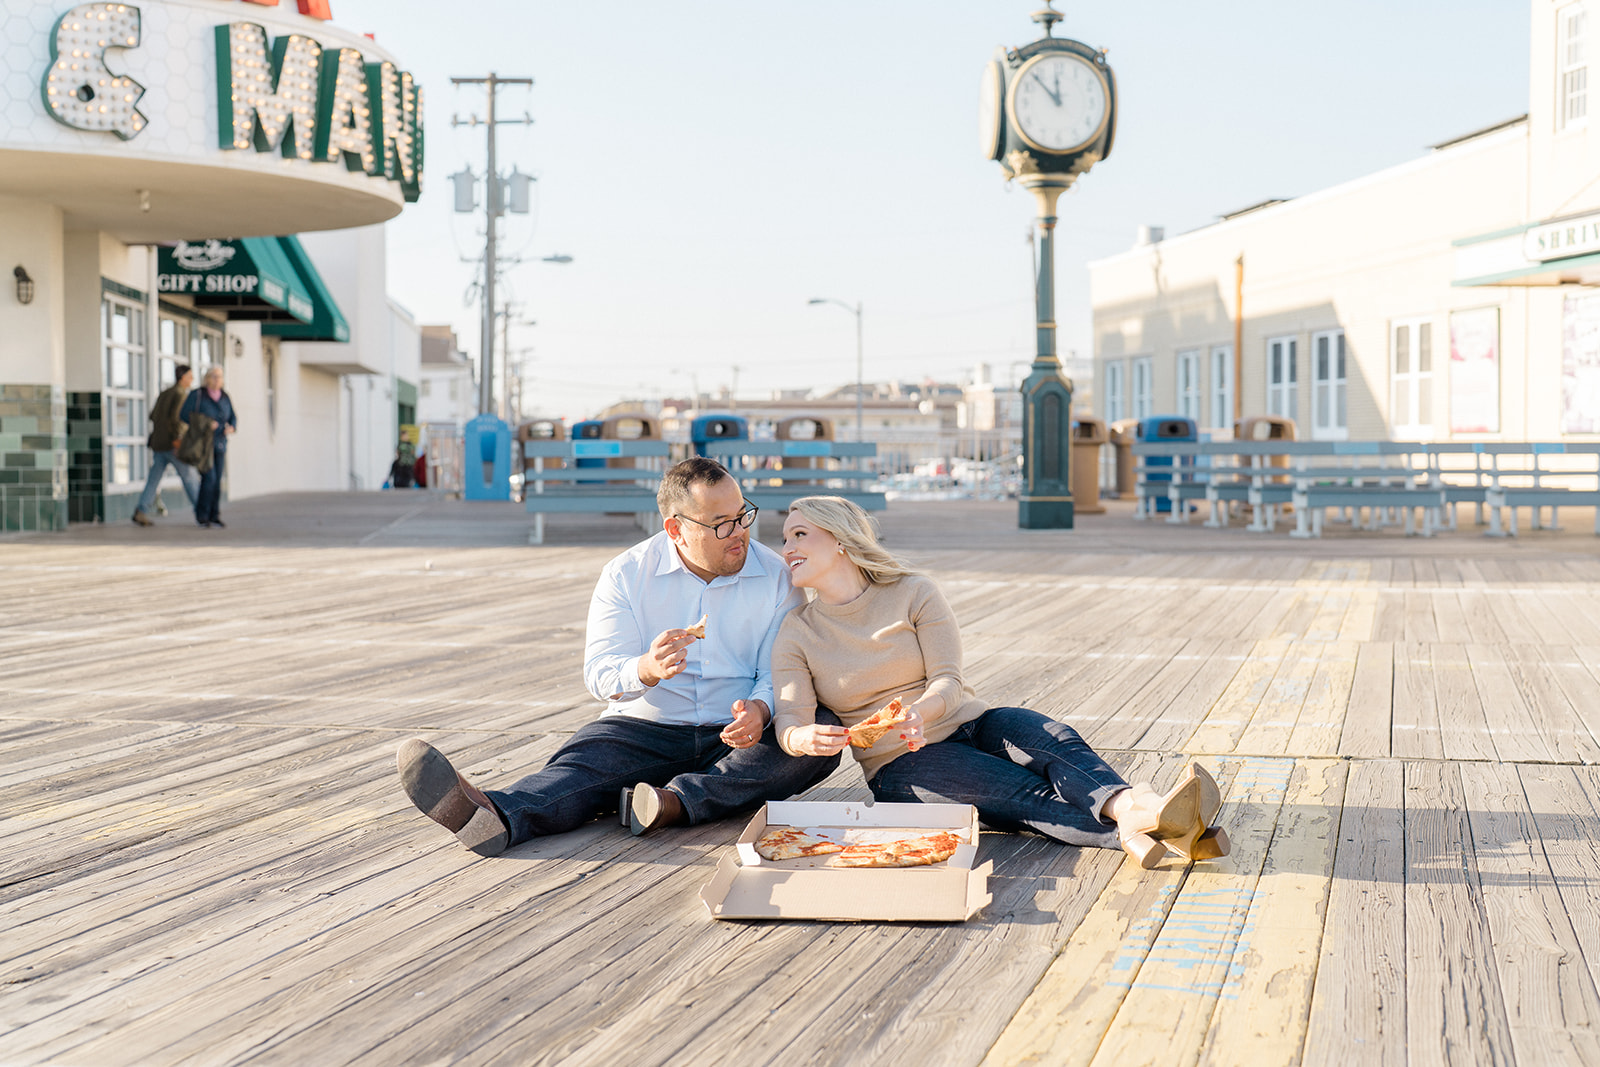 Couple sitting on the boardwalk eating pizza